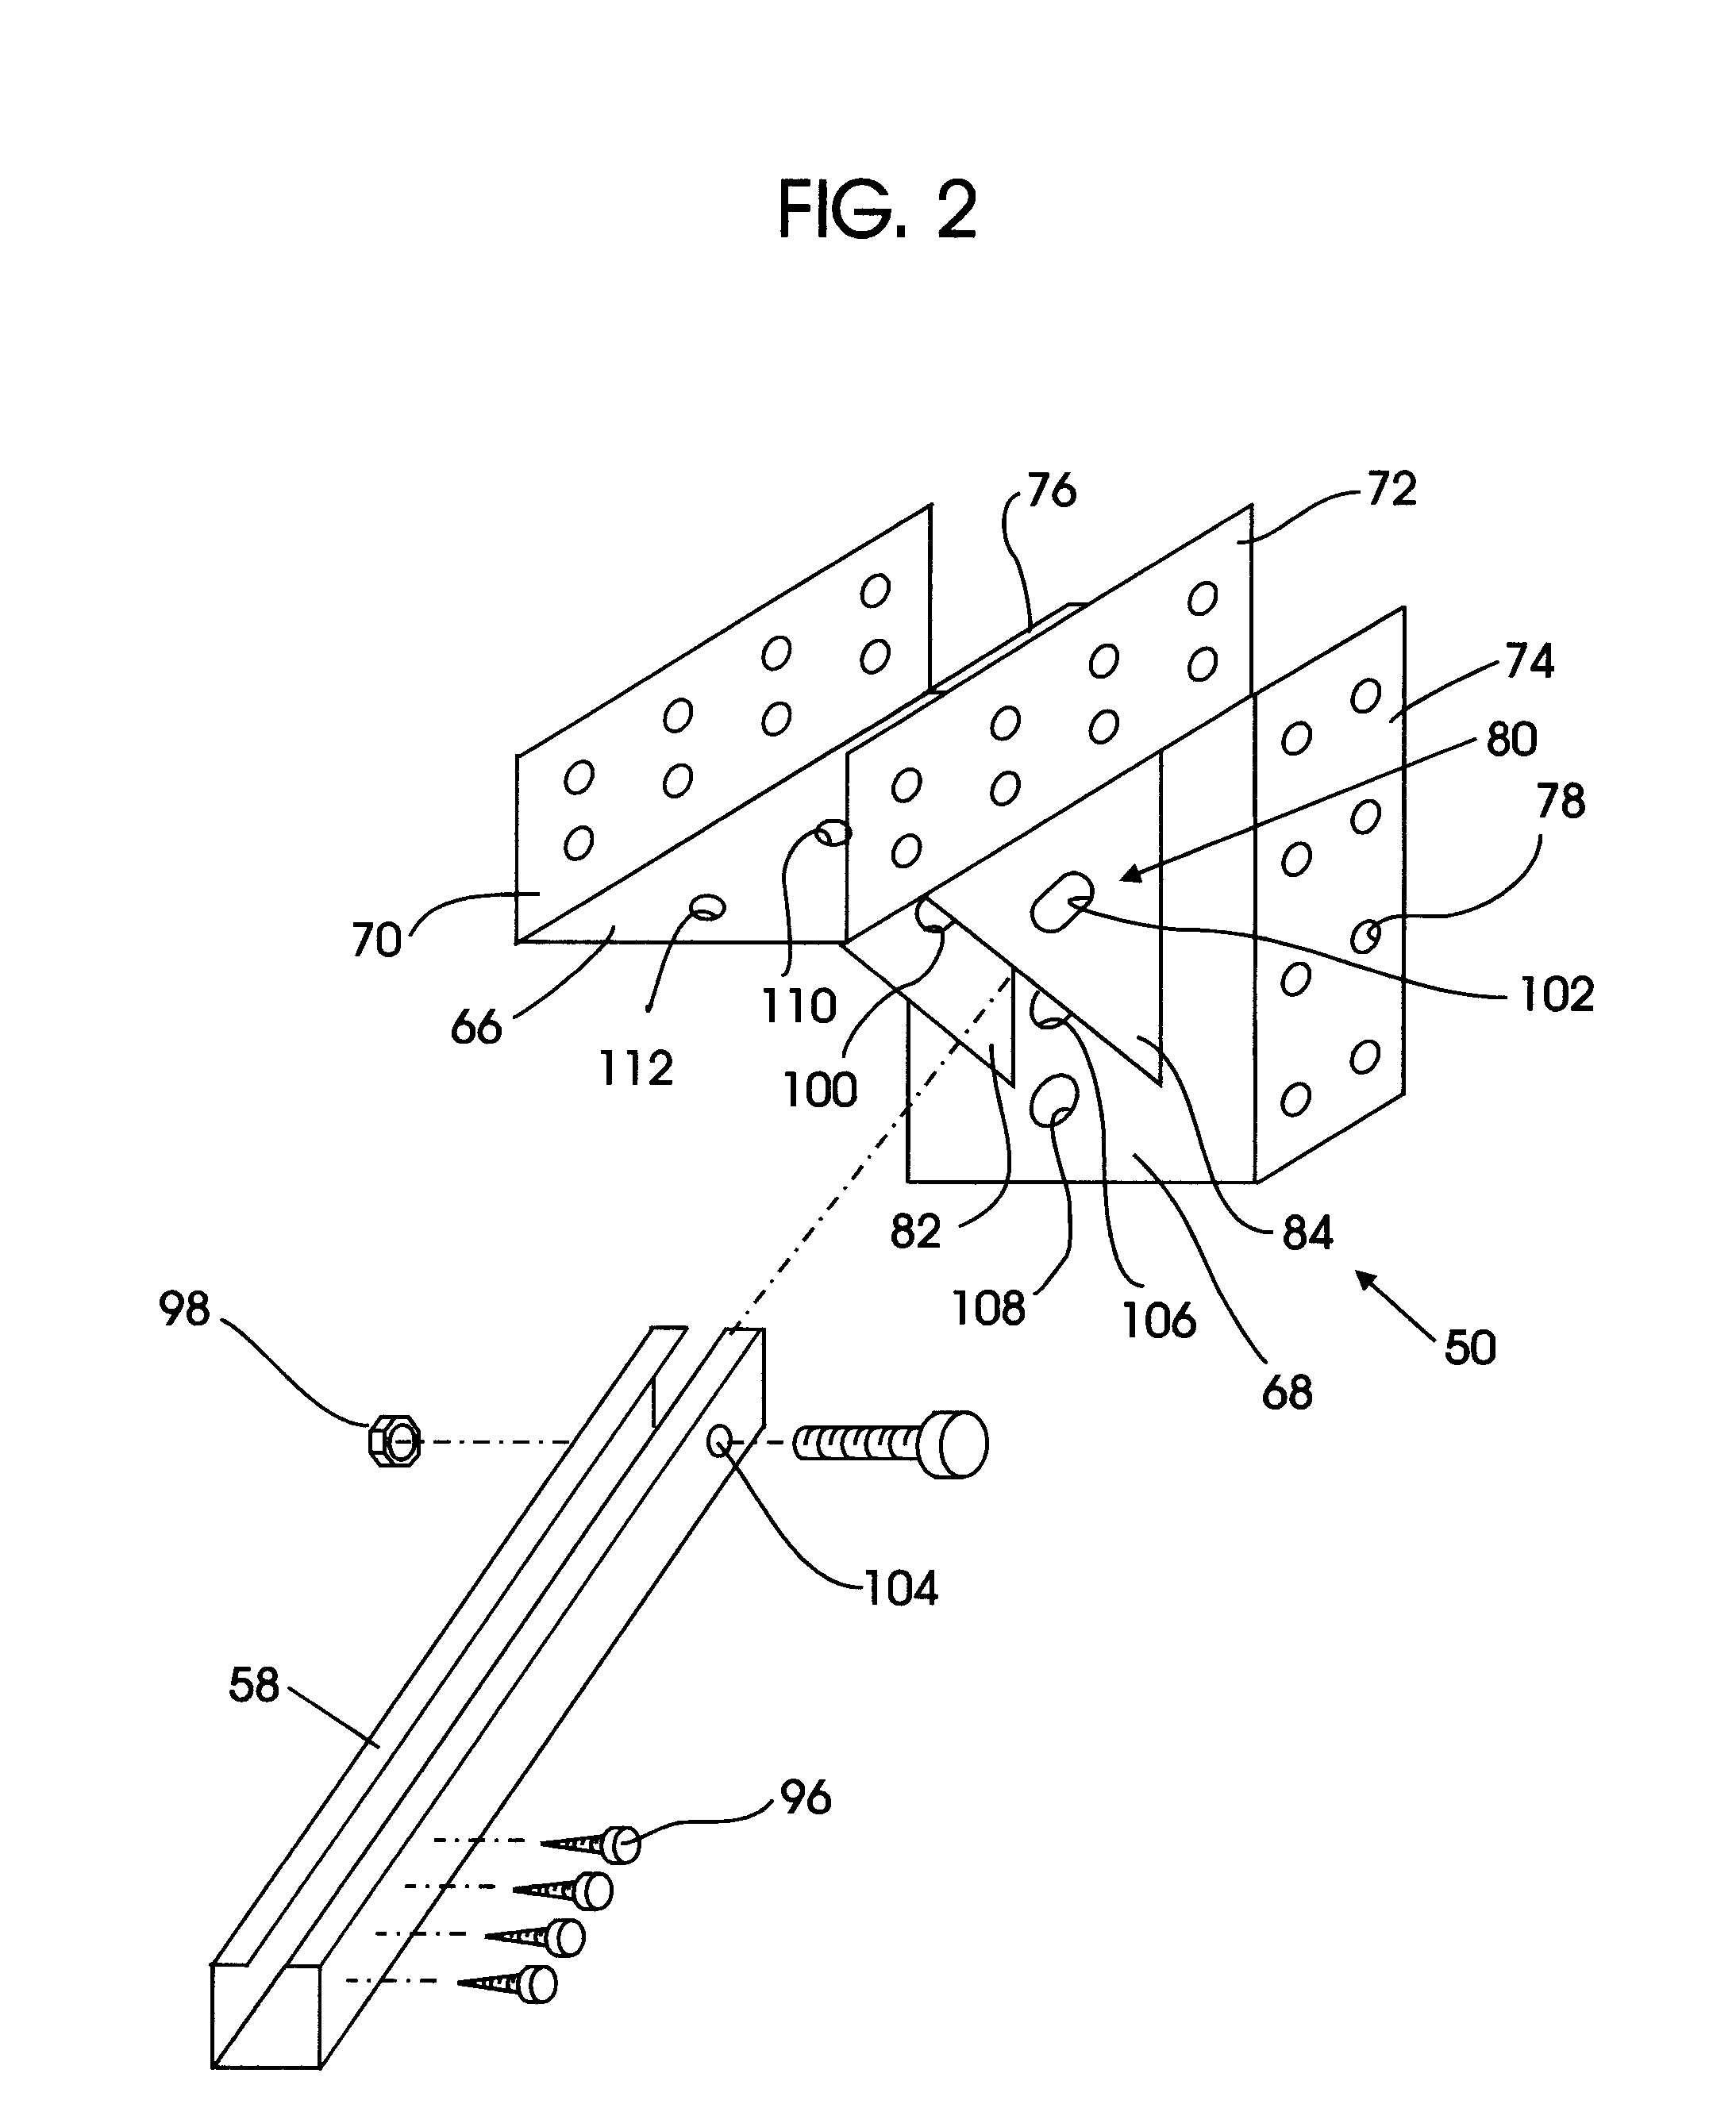 Lateral and uplift resistance apparatus and methods for use in structural framing